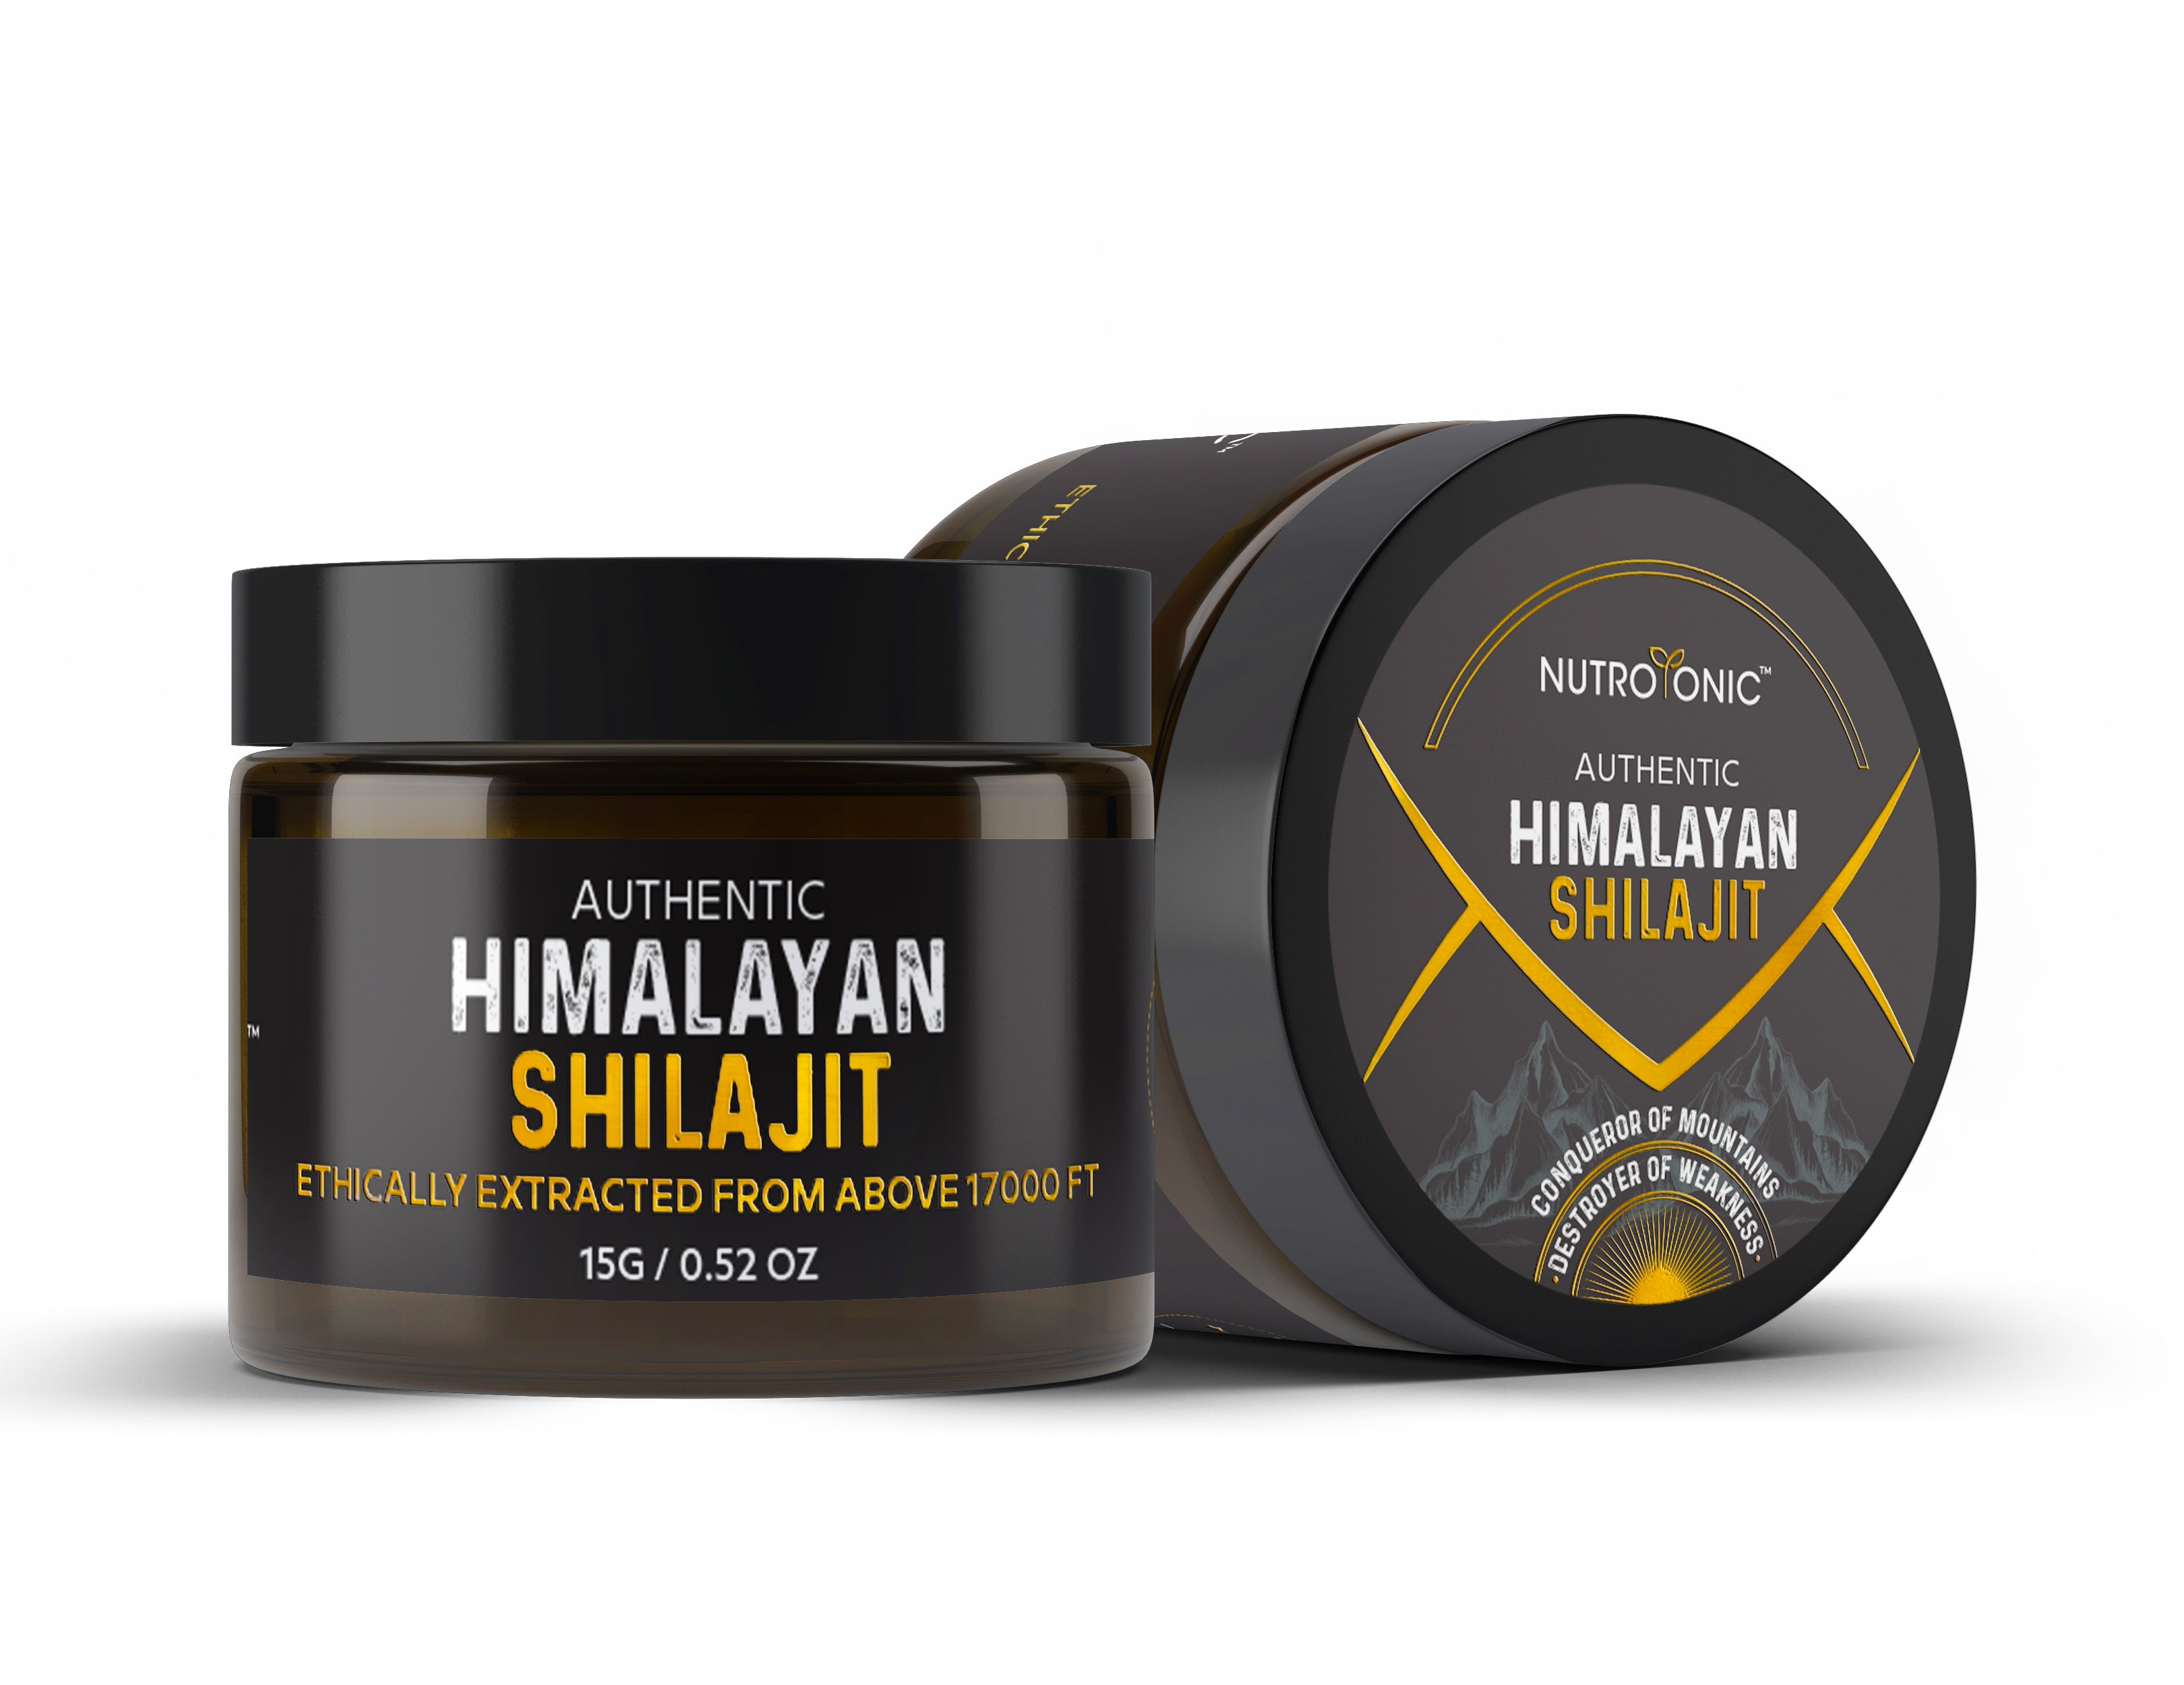 WHAT ARE THE BENEFITS OF TAKING SHILAJIT DAILY FOR 4-8 MONTHS?